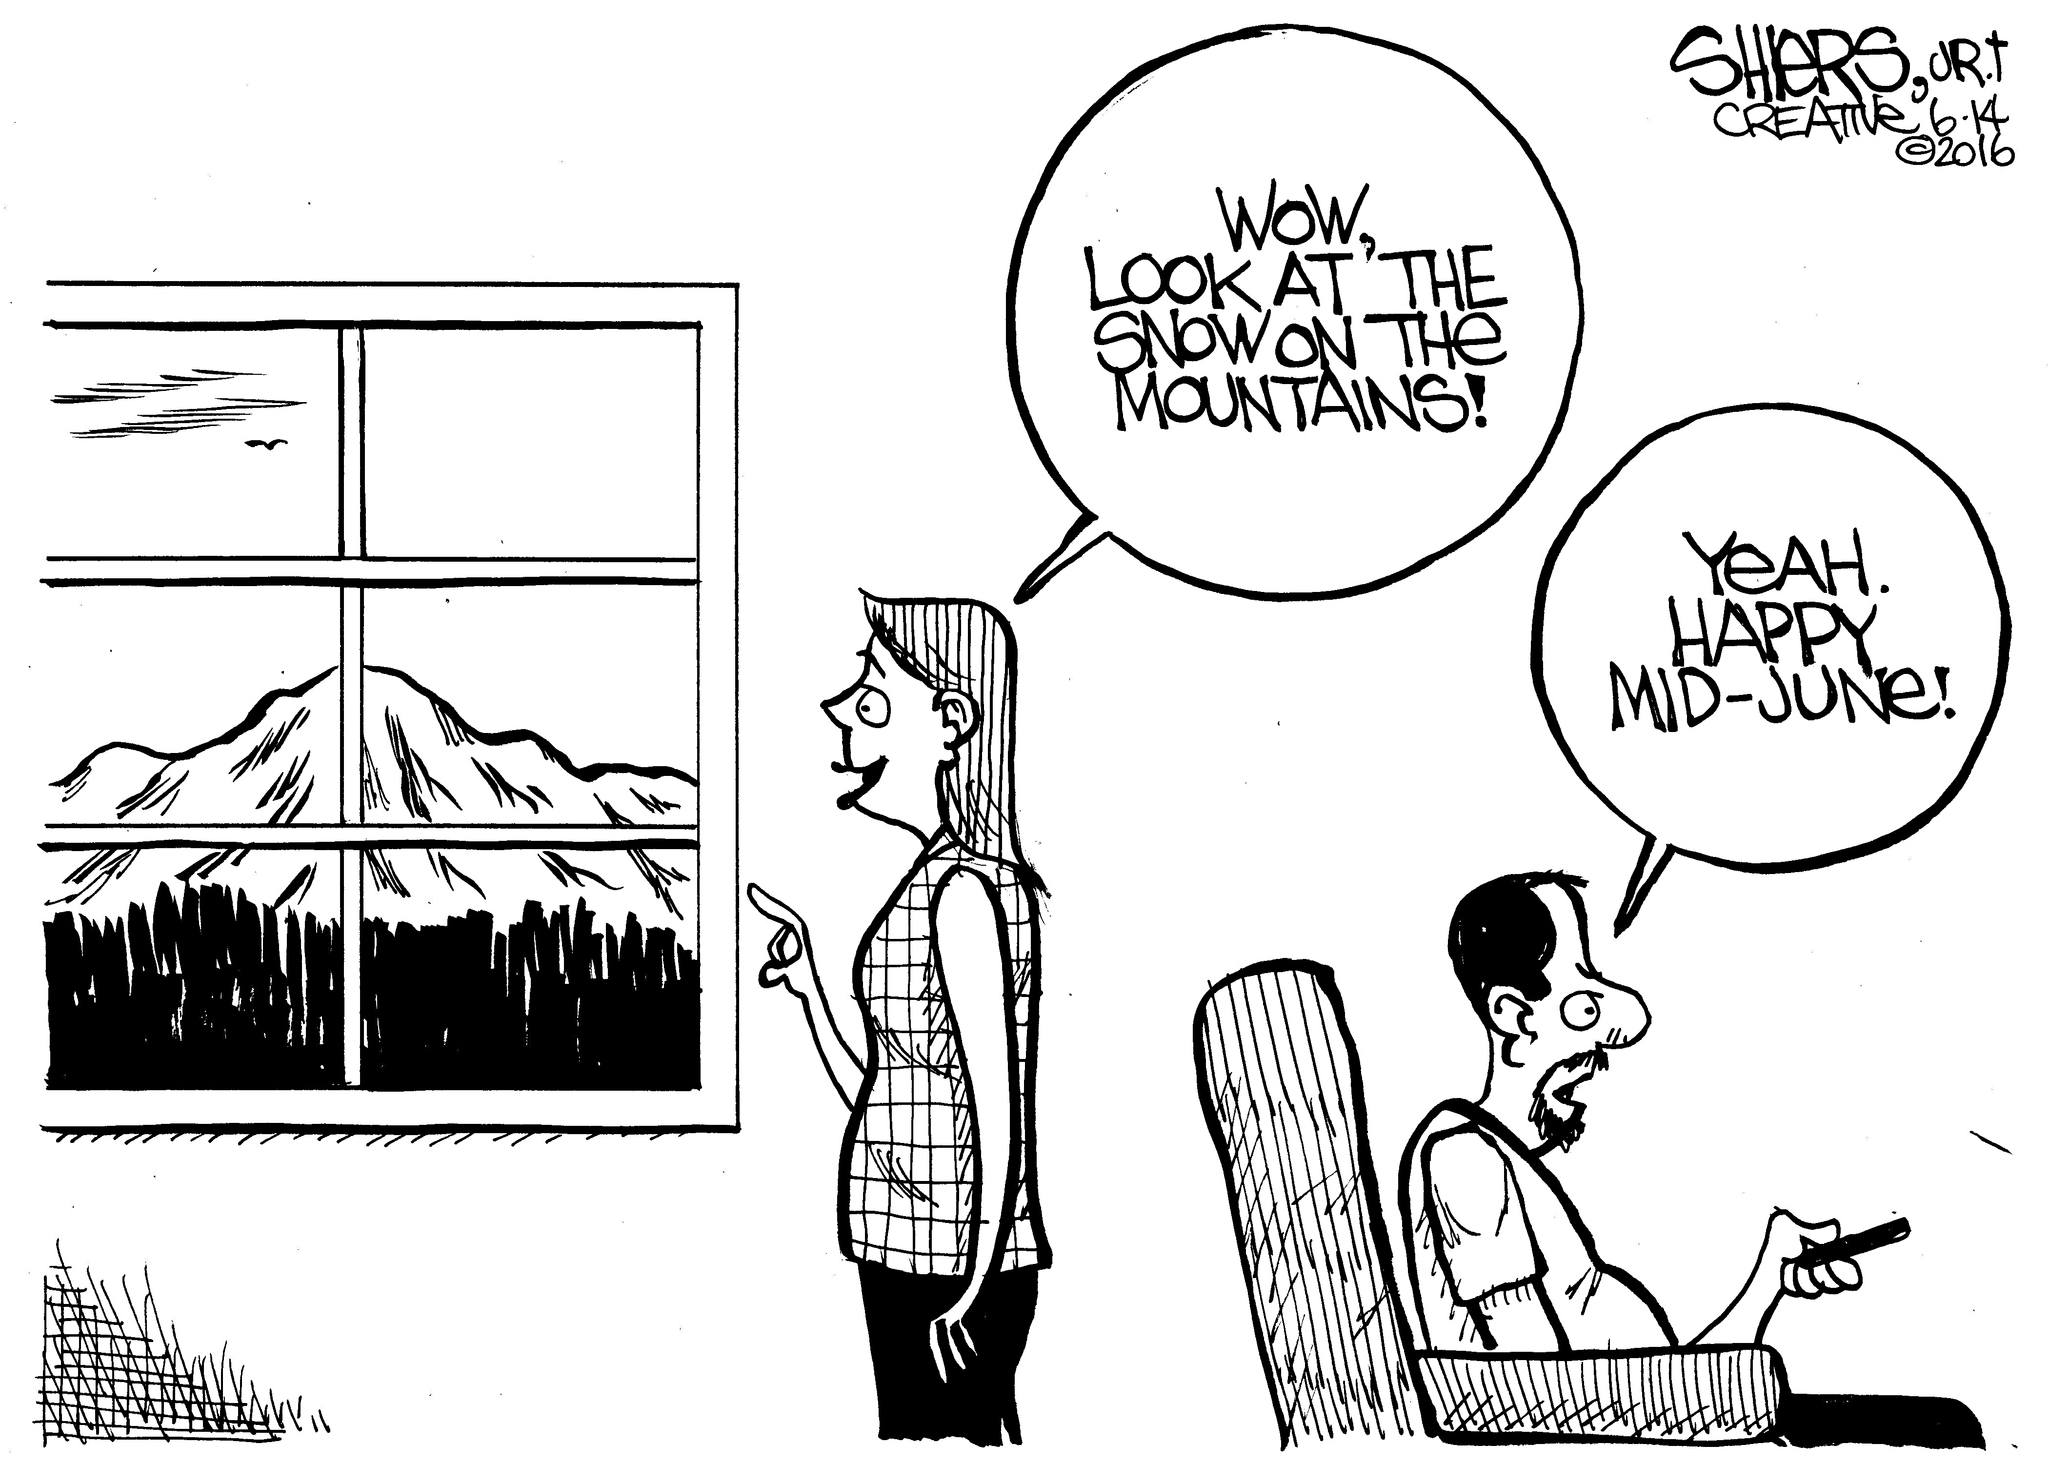 Look at all the snow on the mountains | Cartoon for June 21 - Frank Shiers